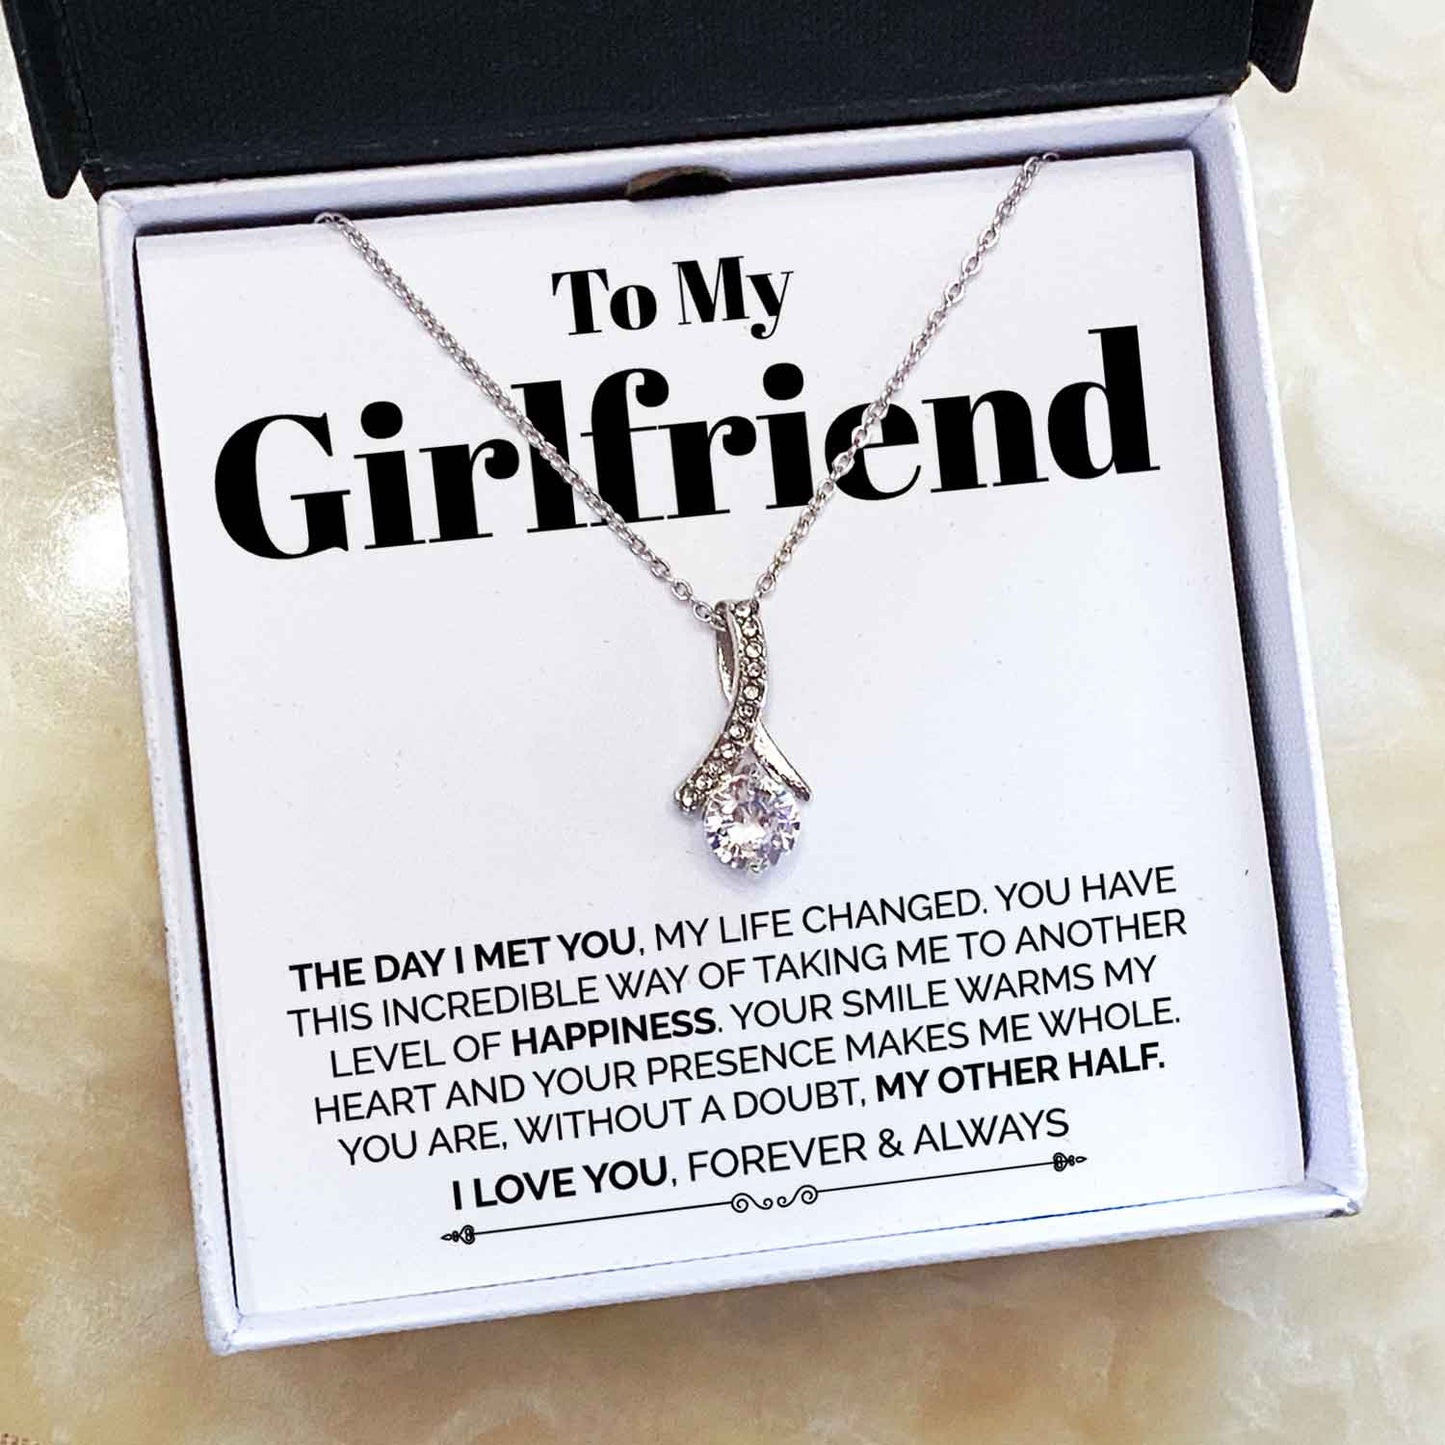 23 To My Girlfriend - The Day I Met You - White Gold Alluring Necklace